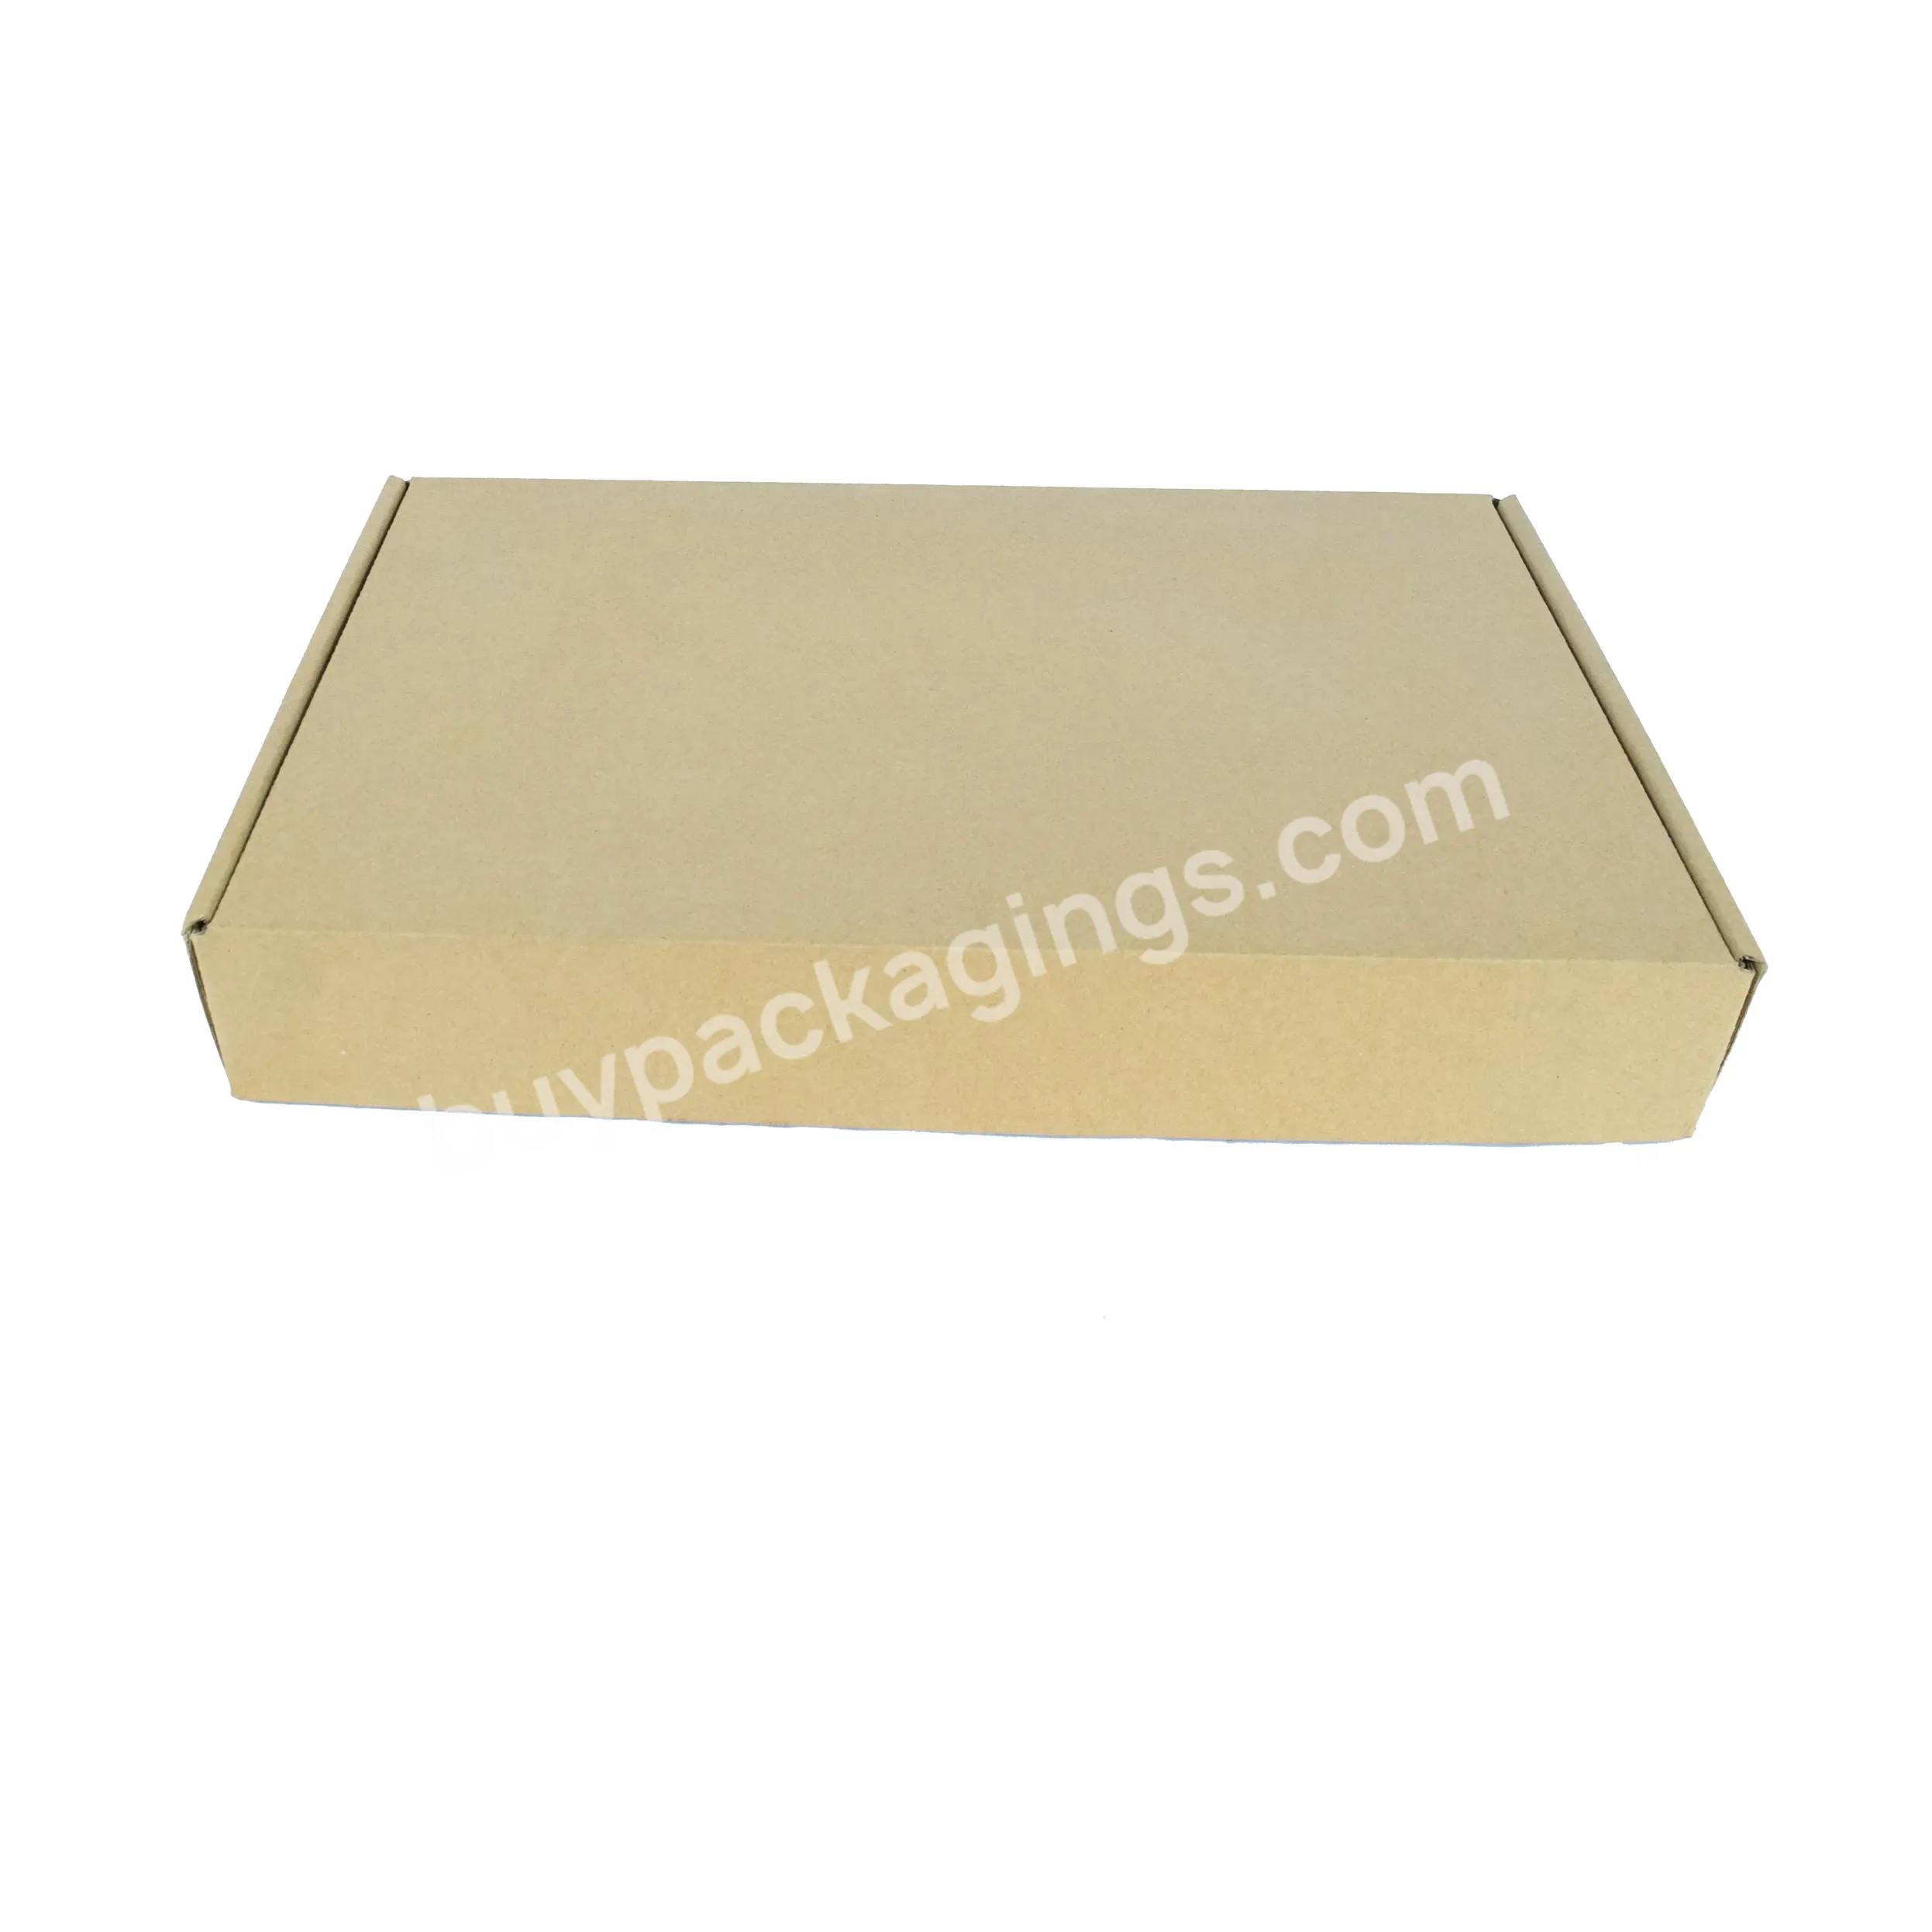 Recycle Corrugated Custom Box Shipping Printed Flat Foldable Clothing Packaging Dresses Women - Buy Recycle Corrugated Custom Box Shipping,Printed Flat Foldable Clothing Packaging,Borwn Paper Cardboard Box For Dresses Women.